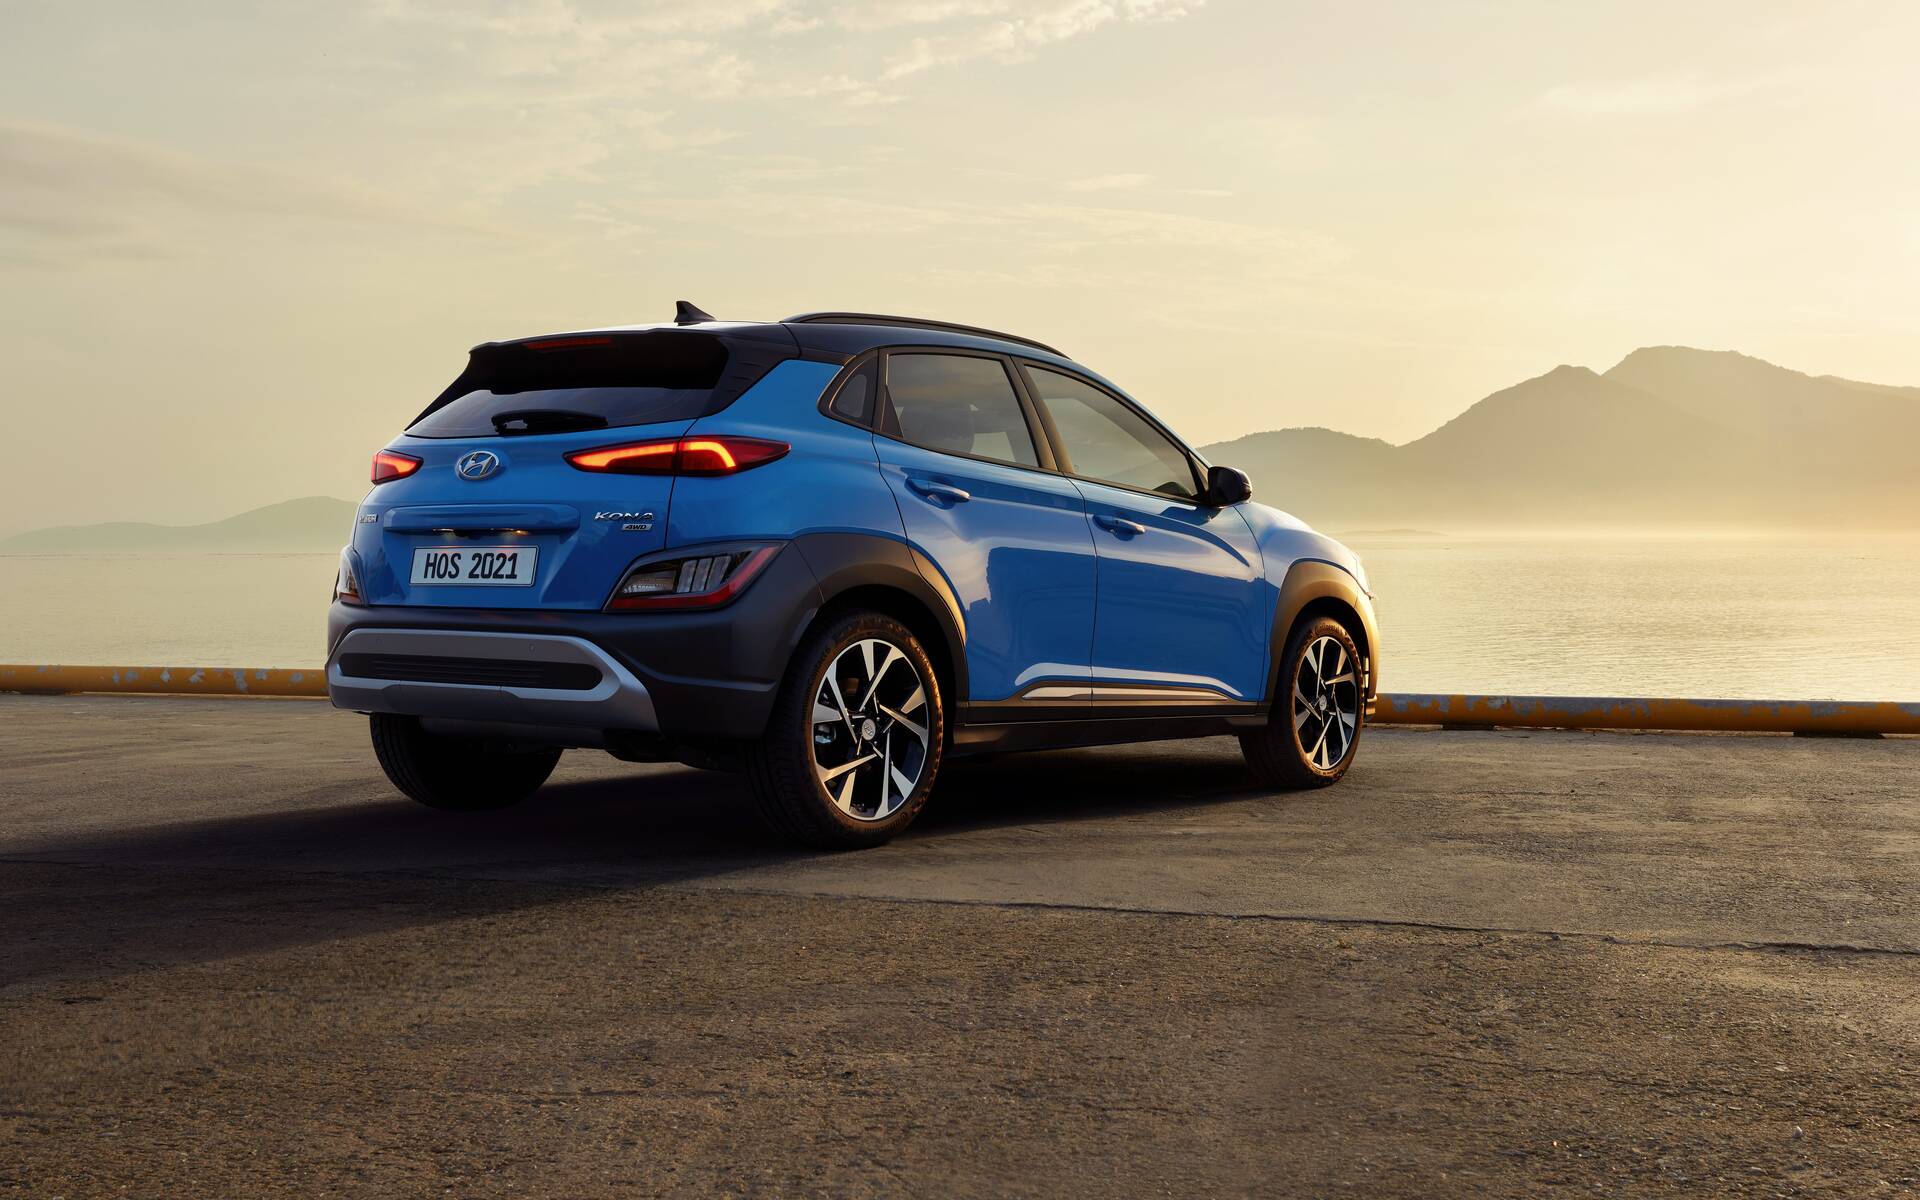 Hyundai Kona Officially Unveiled With New Looks N Line Model My XXX Hot Girl